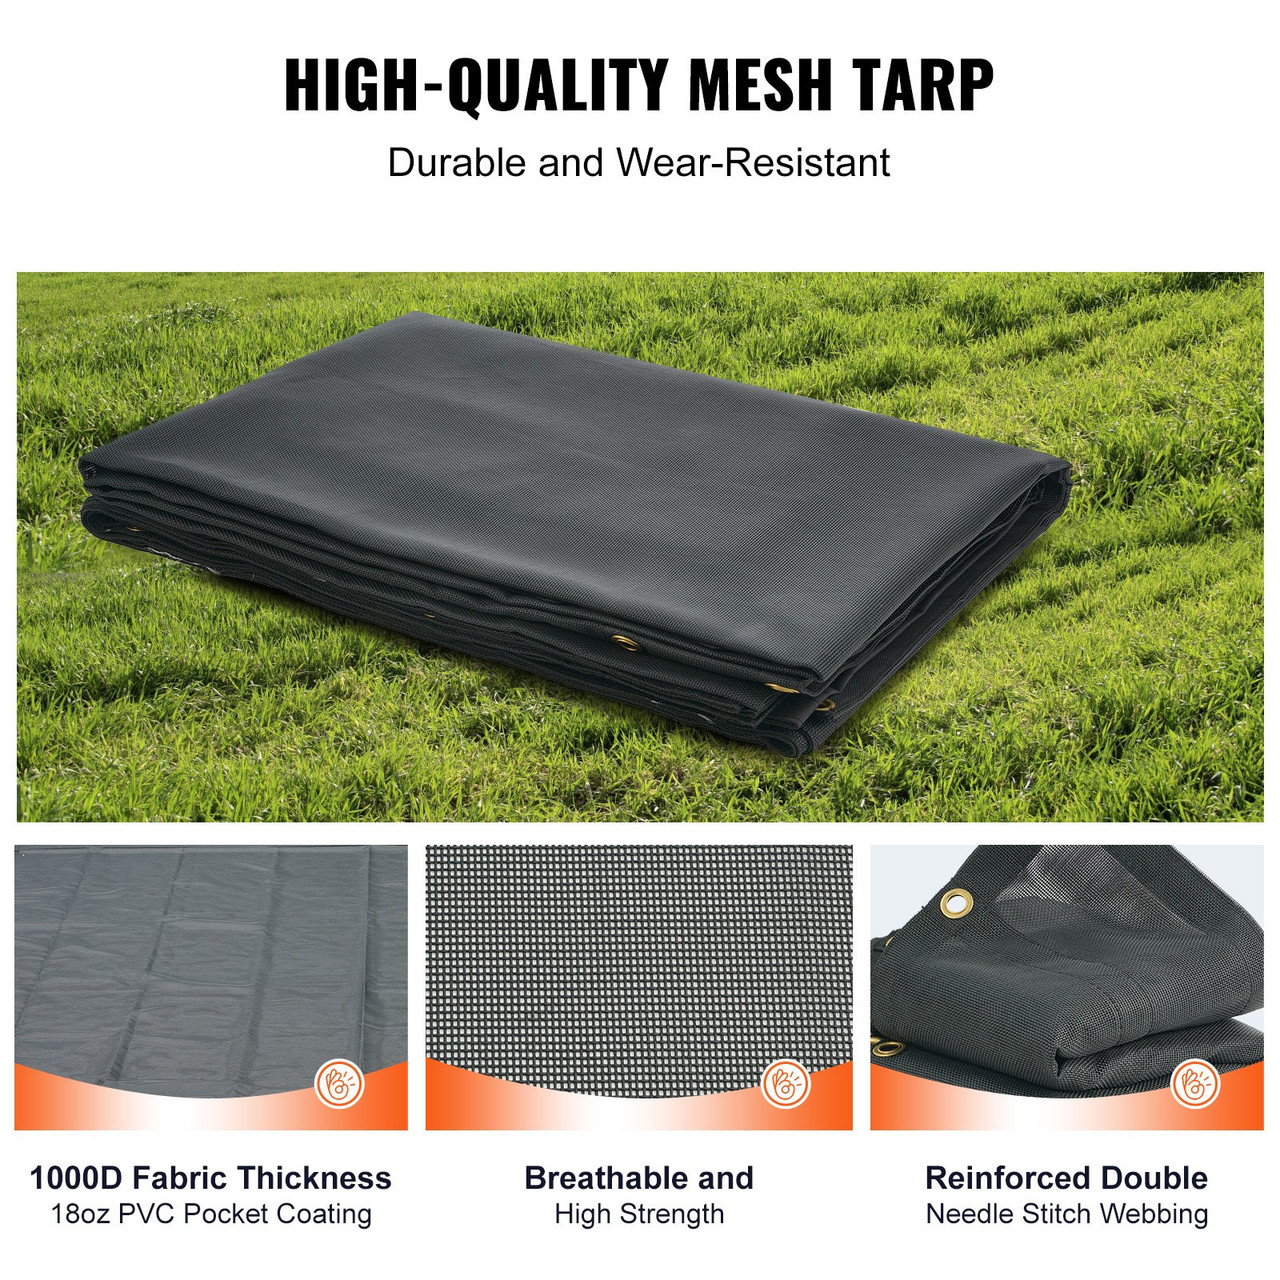 Dump Truck Mesh Tarp, 7 x 14 ft, PVC Coated Black Heavy Duty Cover with 5.5" 18oz Double Pocket, Brass Grommets, Reinforced Double Needle Stitch Webbing Fits Manual or Electric Dump Truck System